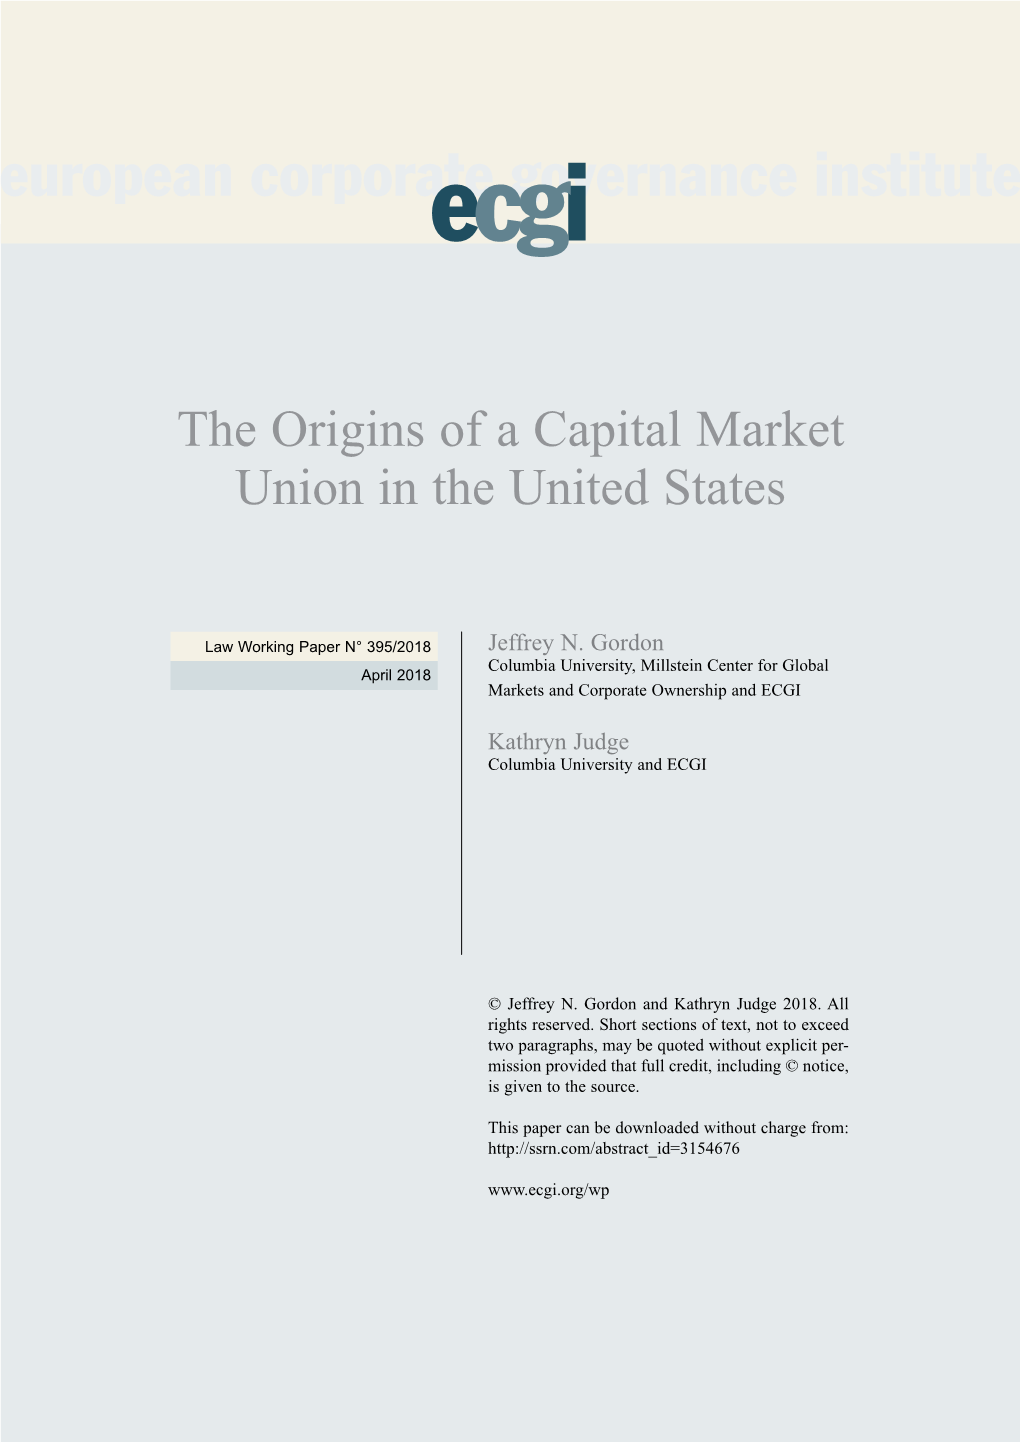 The Origins of a Capital Market Union in the United States